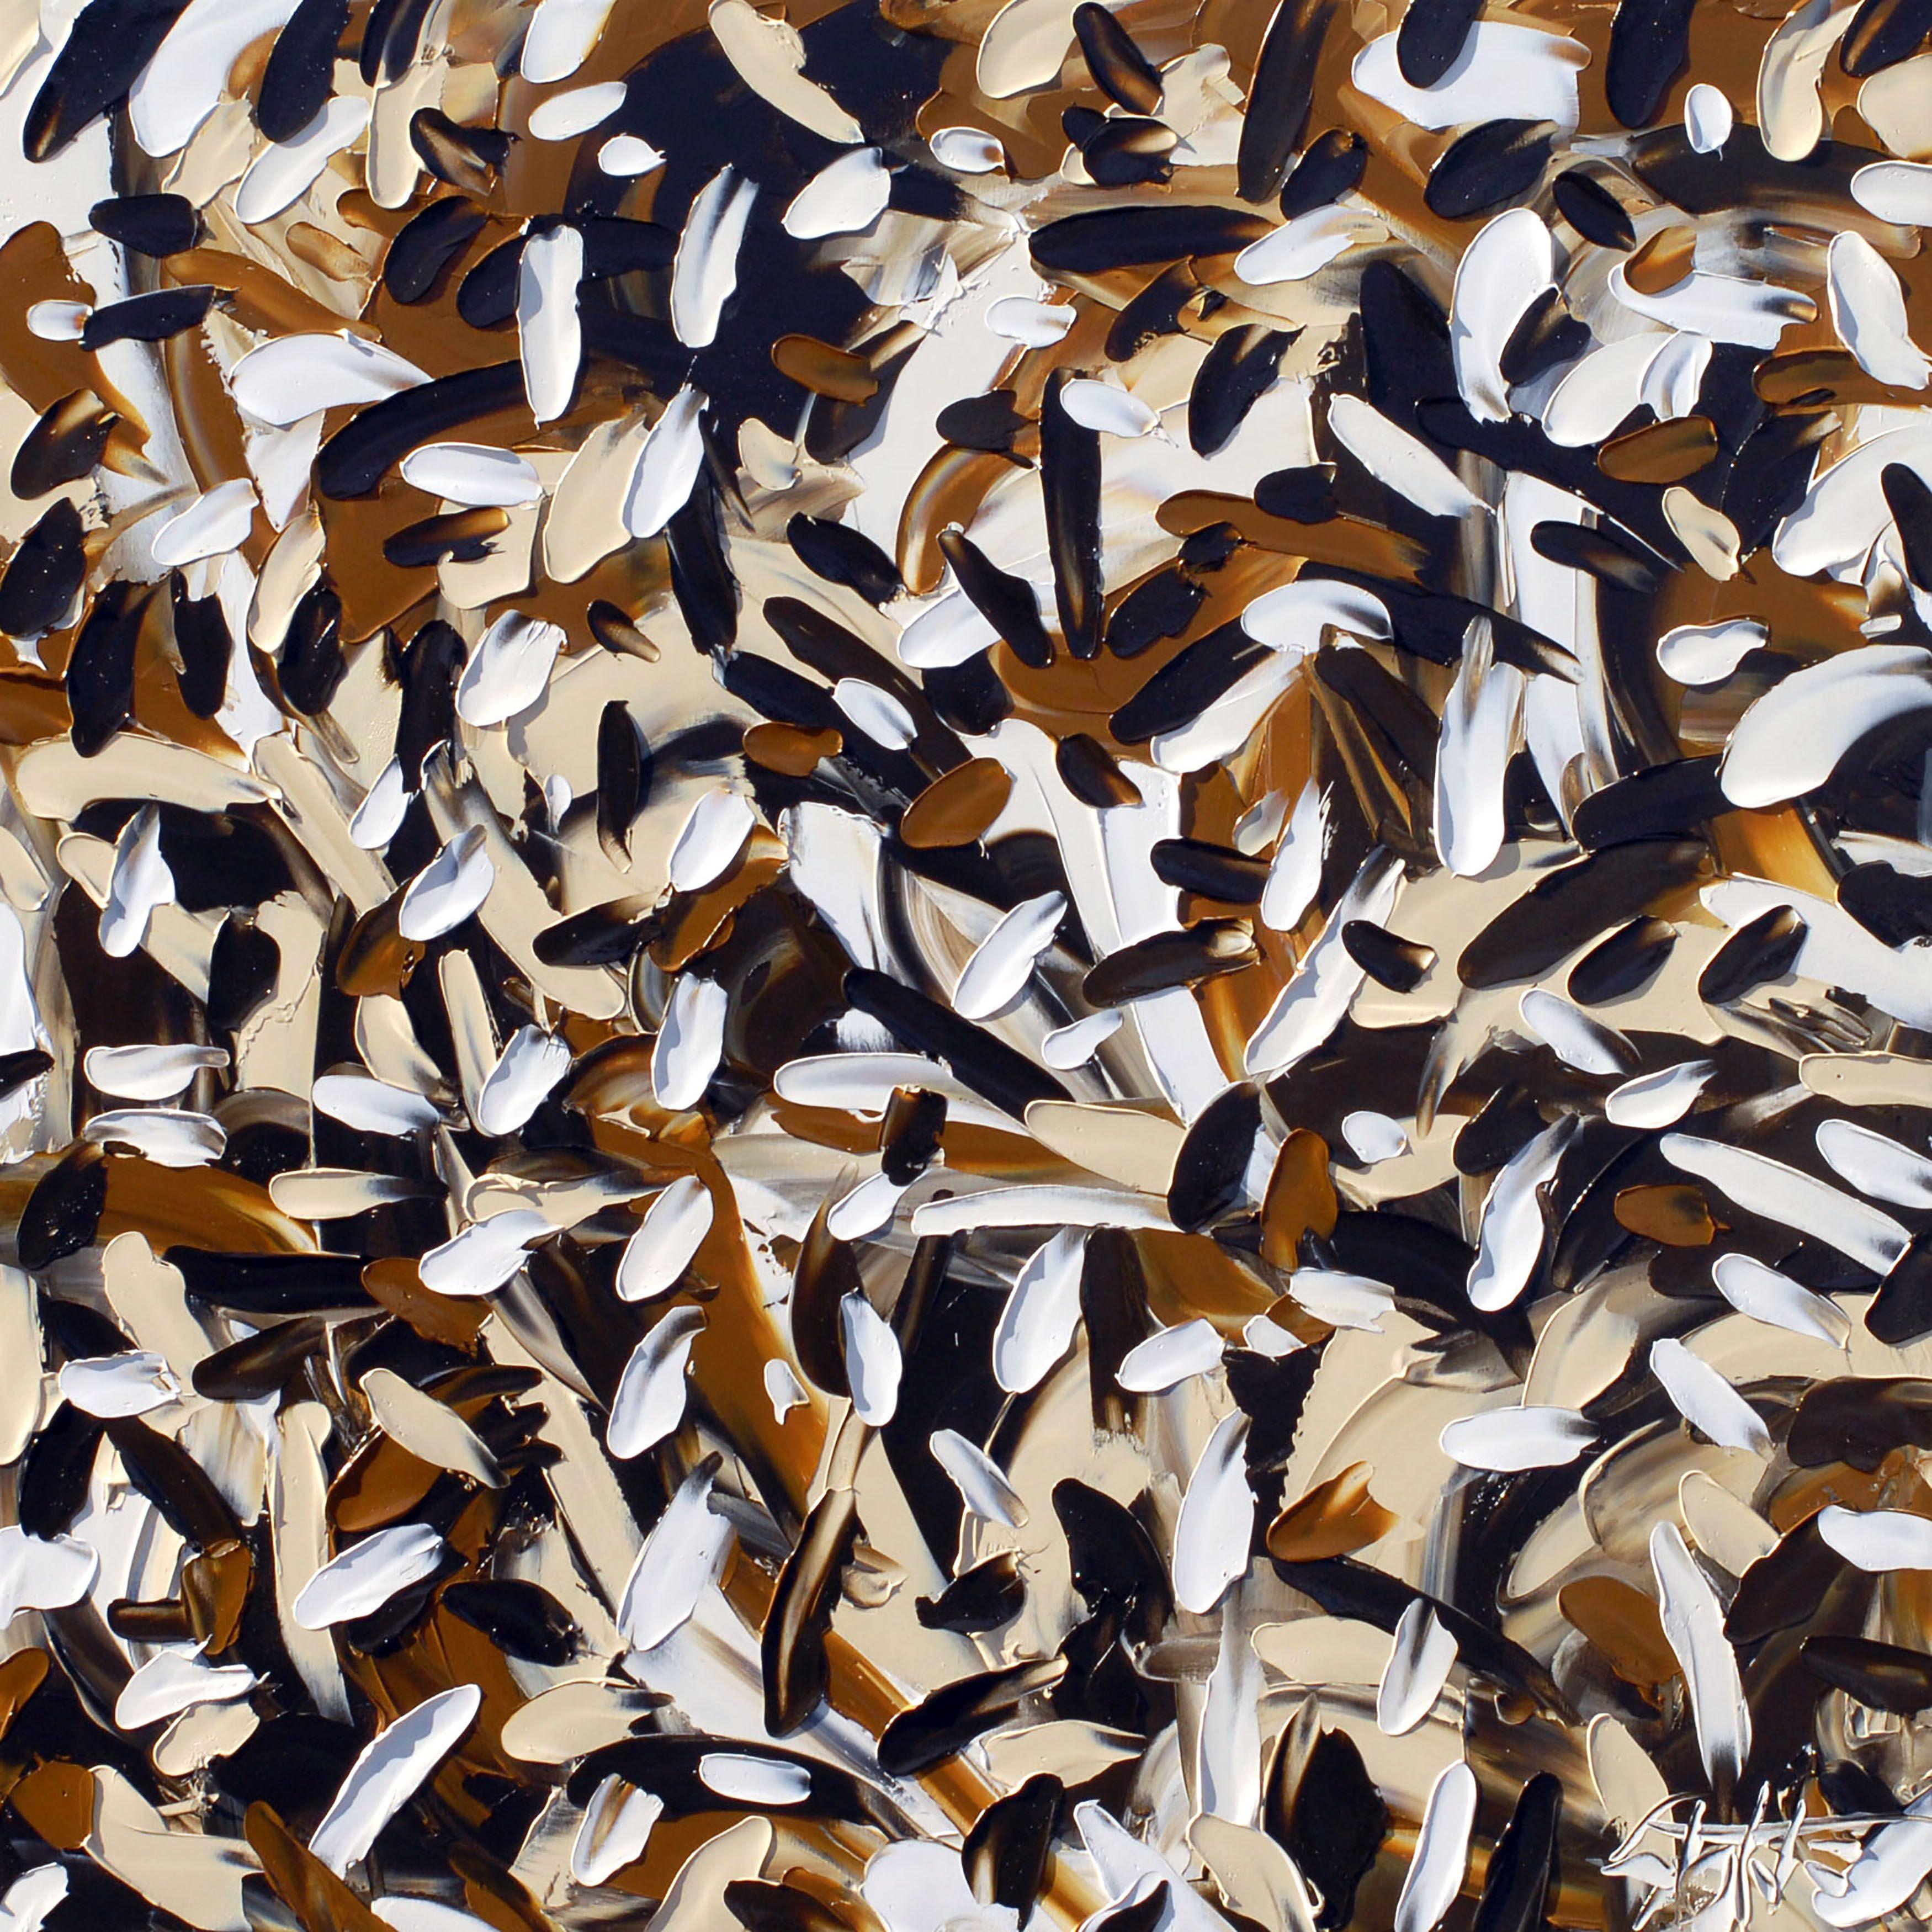 Bill Stone Abstract Painting - BLACK AND BROWN AND WHITE, Painting, Oil on Canvas